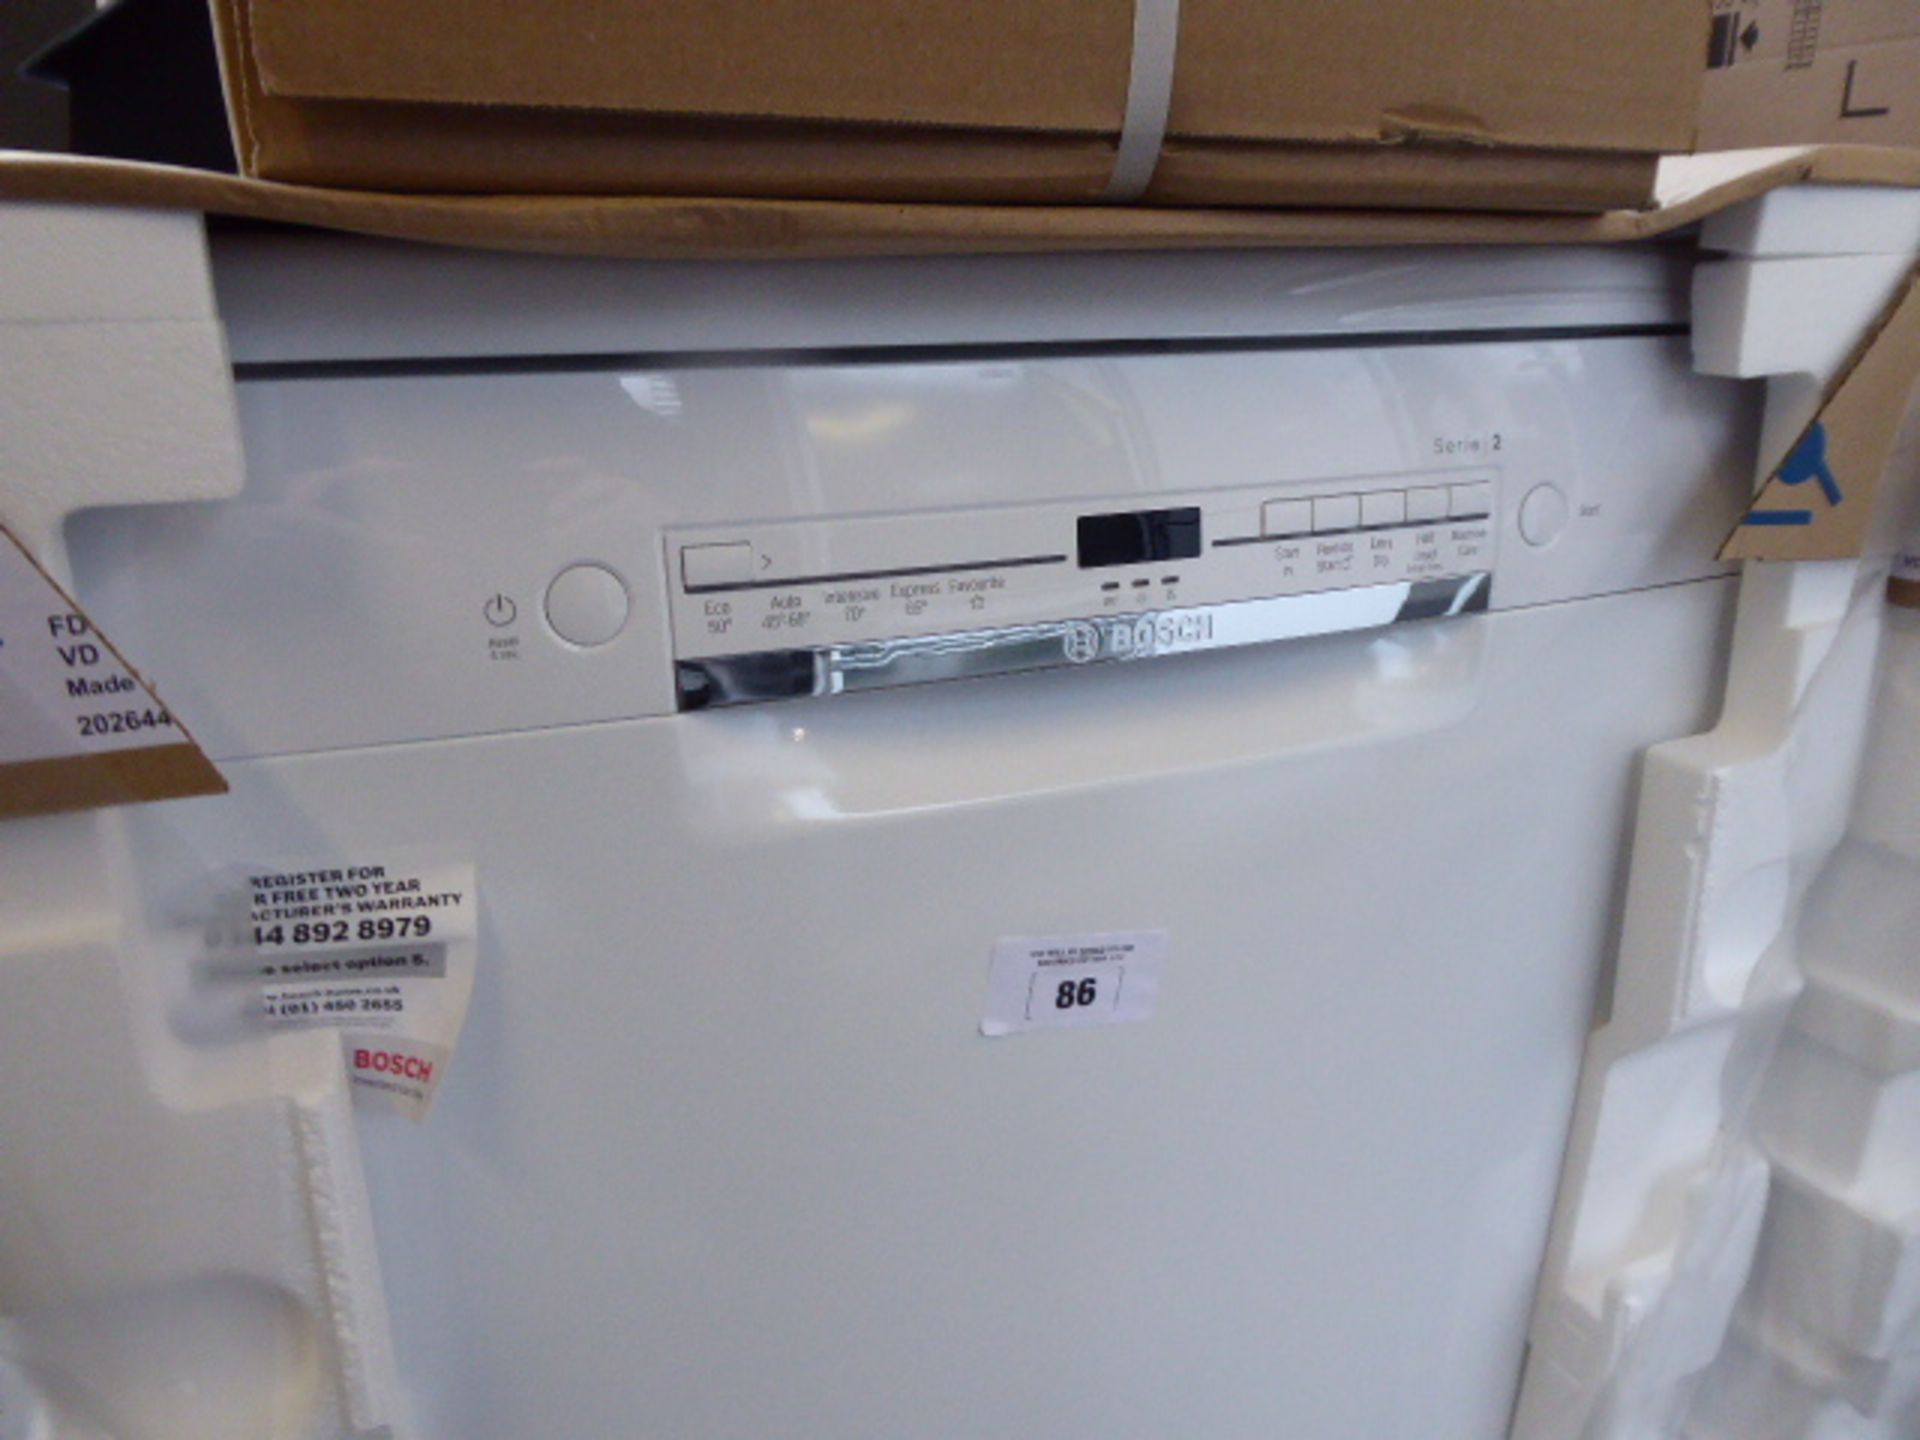 SMS2ITW08GB Bosch Free-standing dishwasher - Image 2 of 2